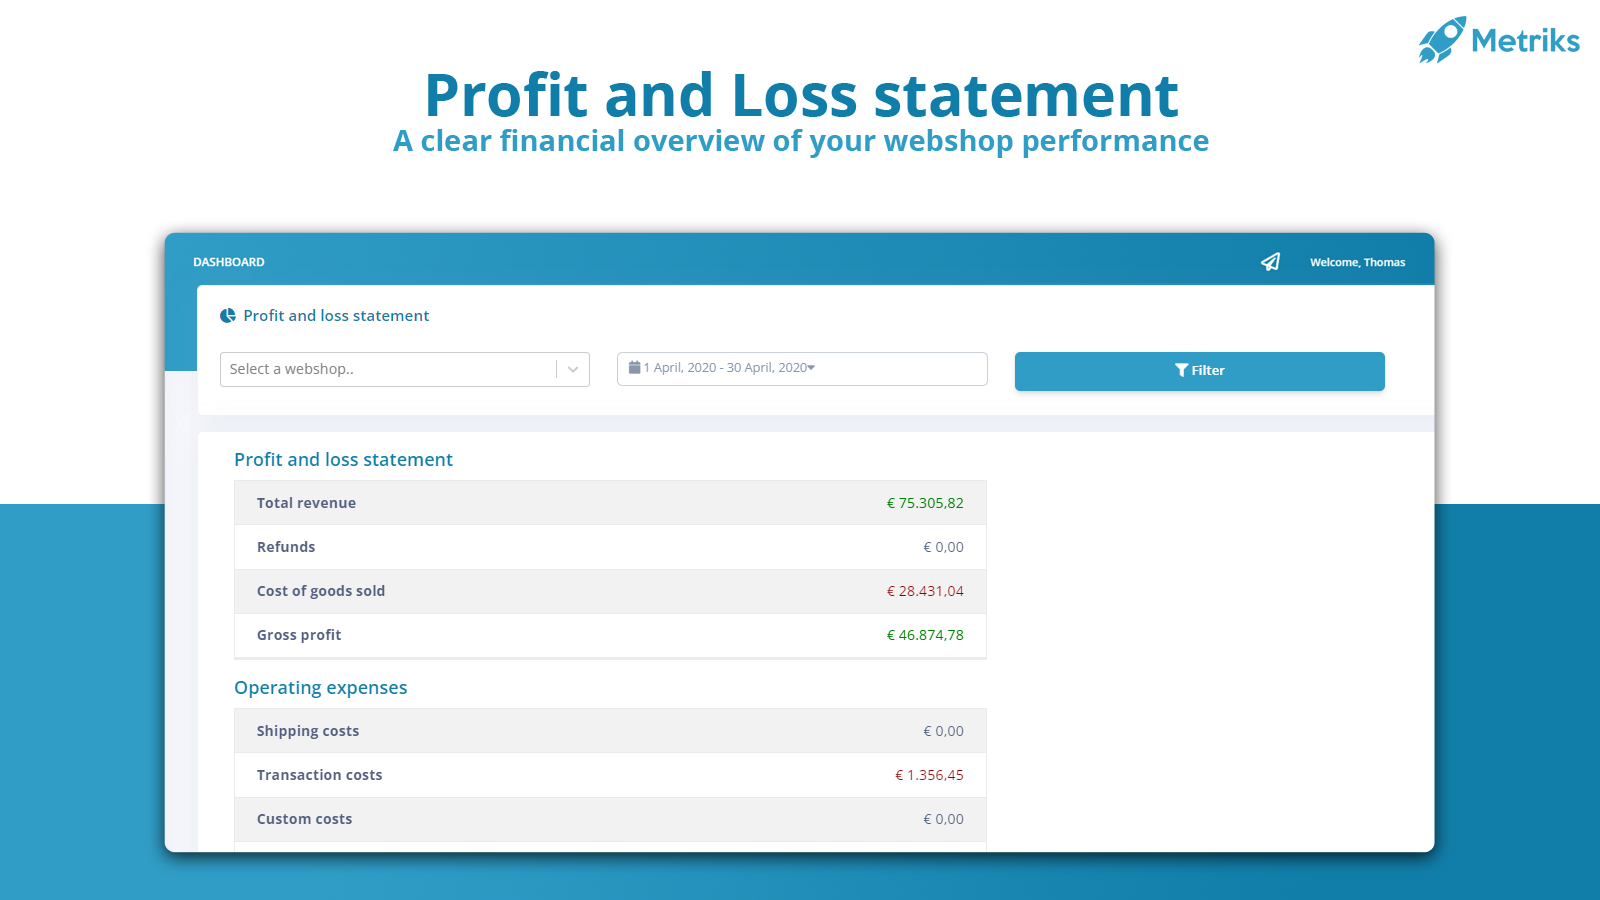 The performance and loss statement helps you with accounting